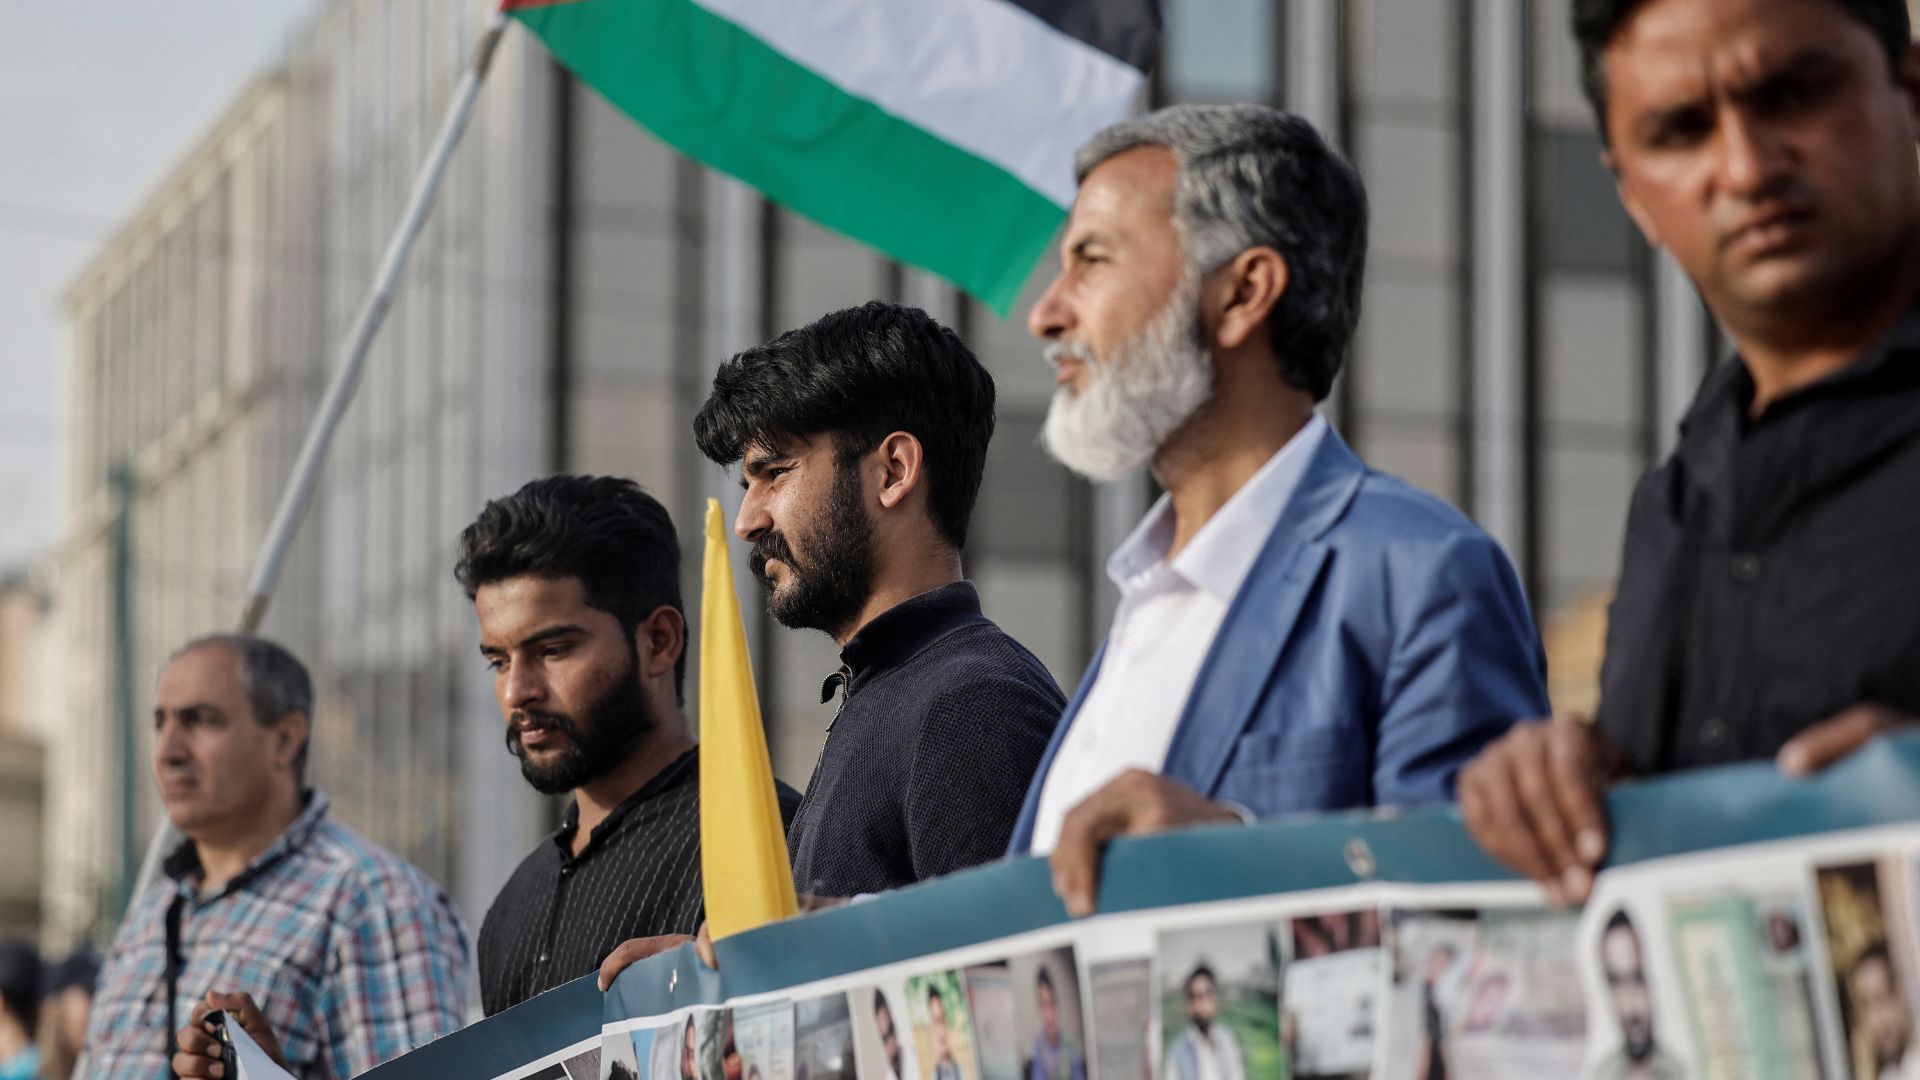 Survivors of the deadly migrant shipwreck, Zahid Akbar, 21, and Inzimam Maqbool, 22, from Pakistan, along with supporters participate in a protest calling for justice. /Louisa Gouliamaki/Reuters